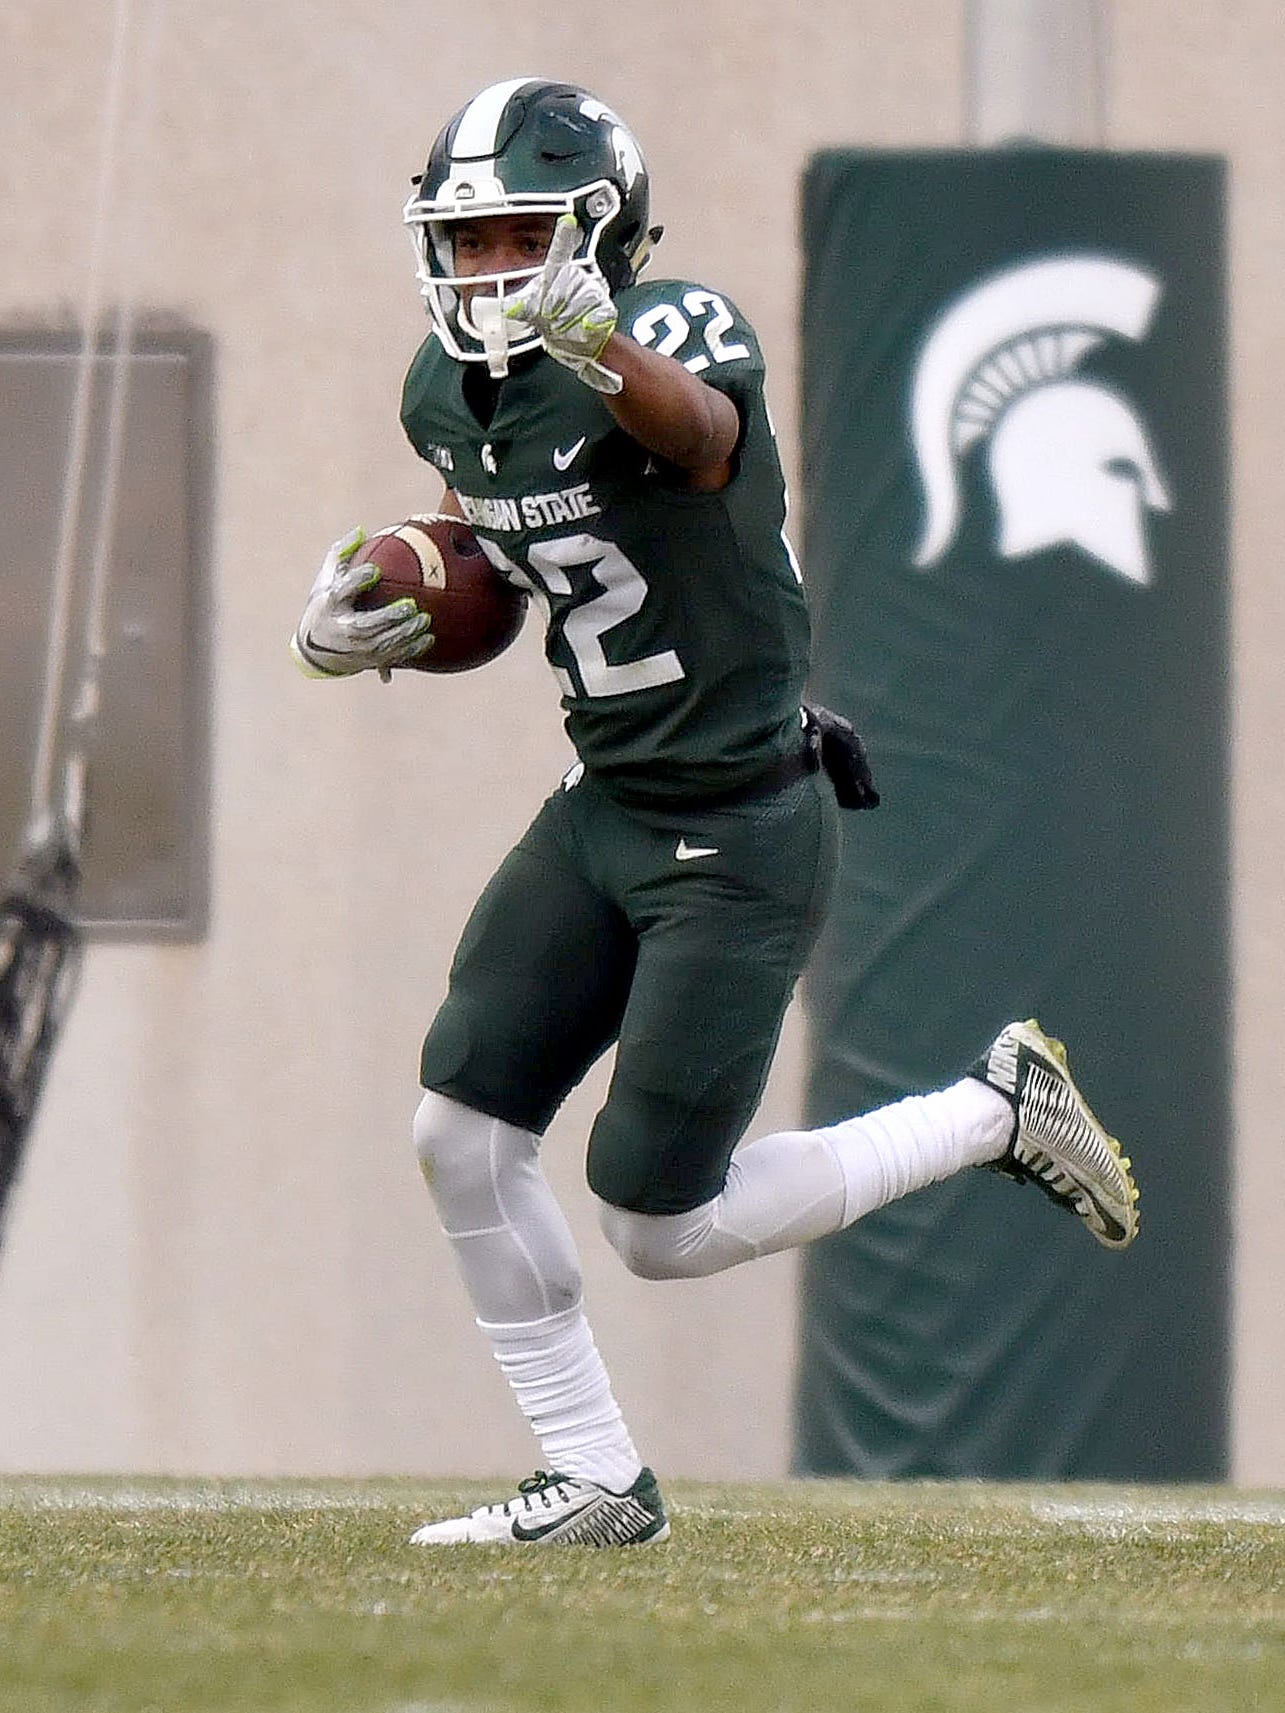 Cornerback – Josiah Scott, Soph. Scott was a freshman All-American according to ESPN, and he'll likely improve on that this season, adding an interception in the spring game to his resume. Senior Tyson Smith is the most likely backup here, though the Spartans have plenty of depth with the likes of redshirt freshman Shakur Brown and early enrollee Kalon Gervin.